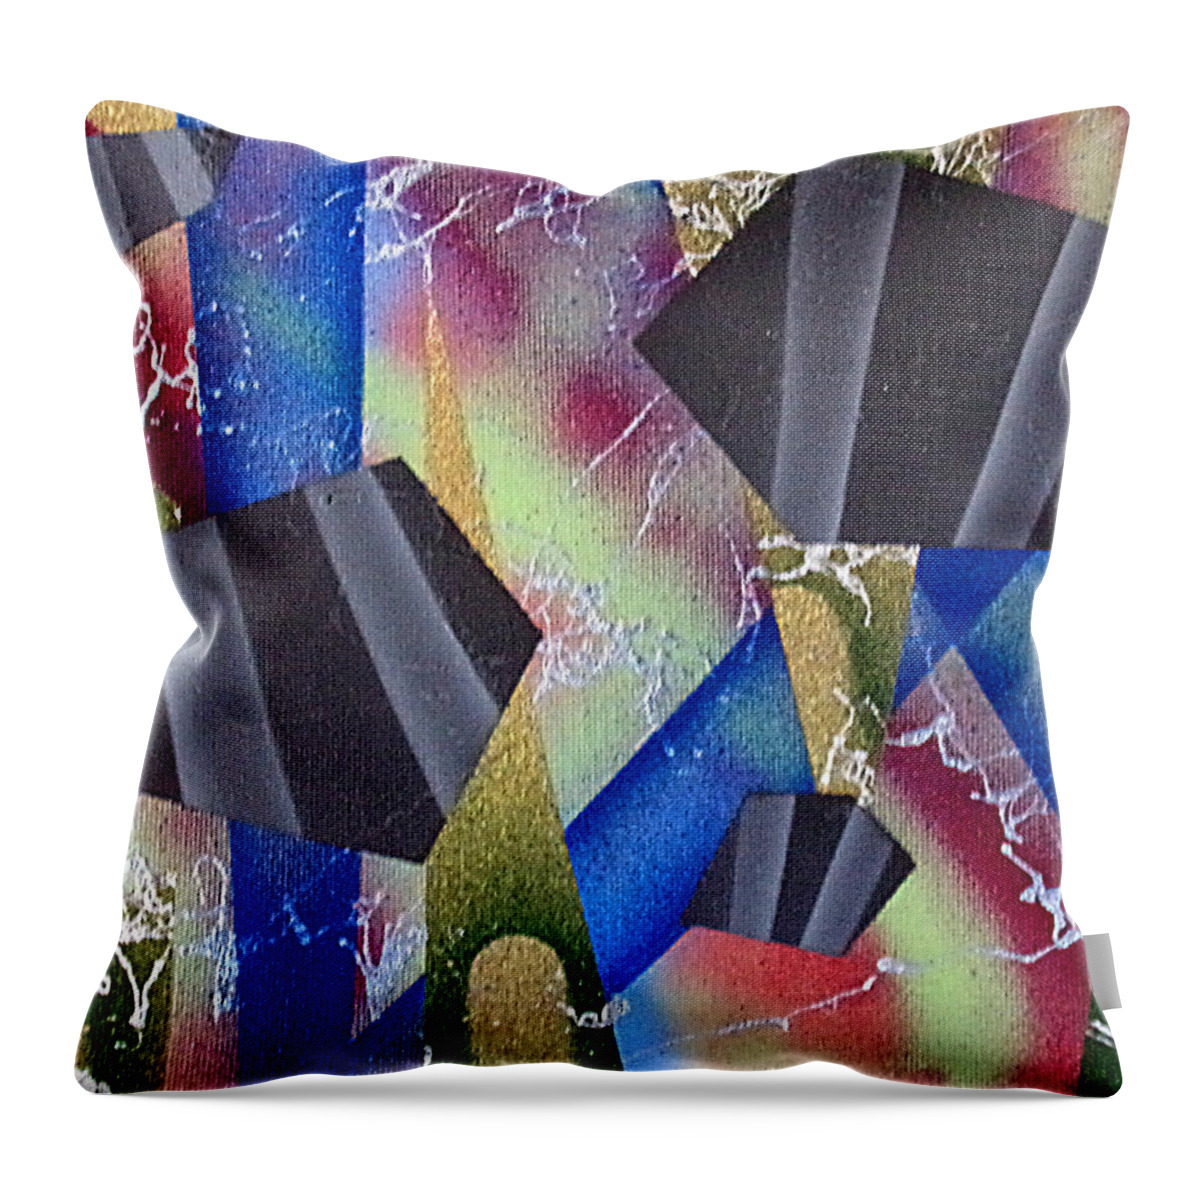 Abstract Throw Pillow featuring the painting Untitled #6 by Tanya Hamell